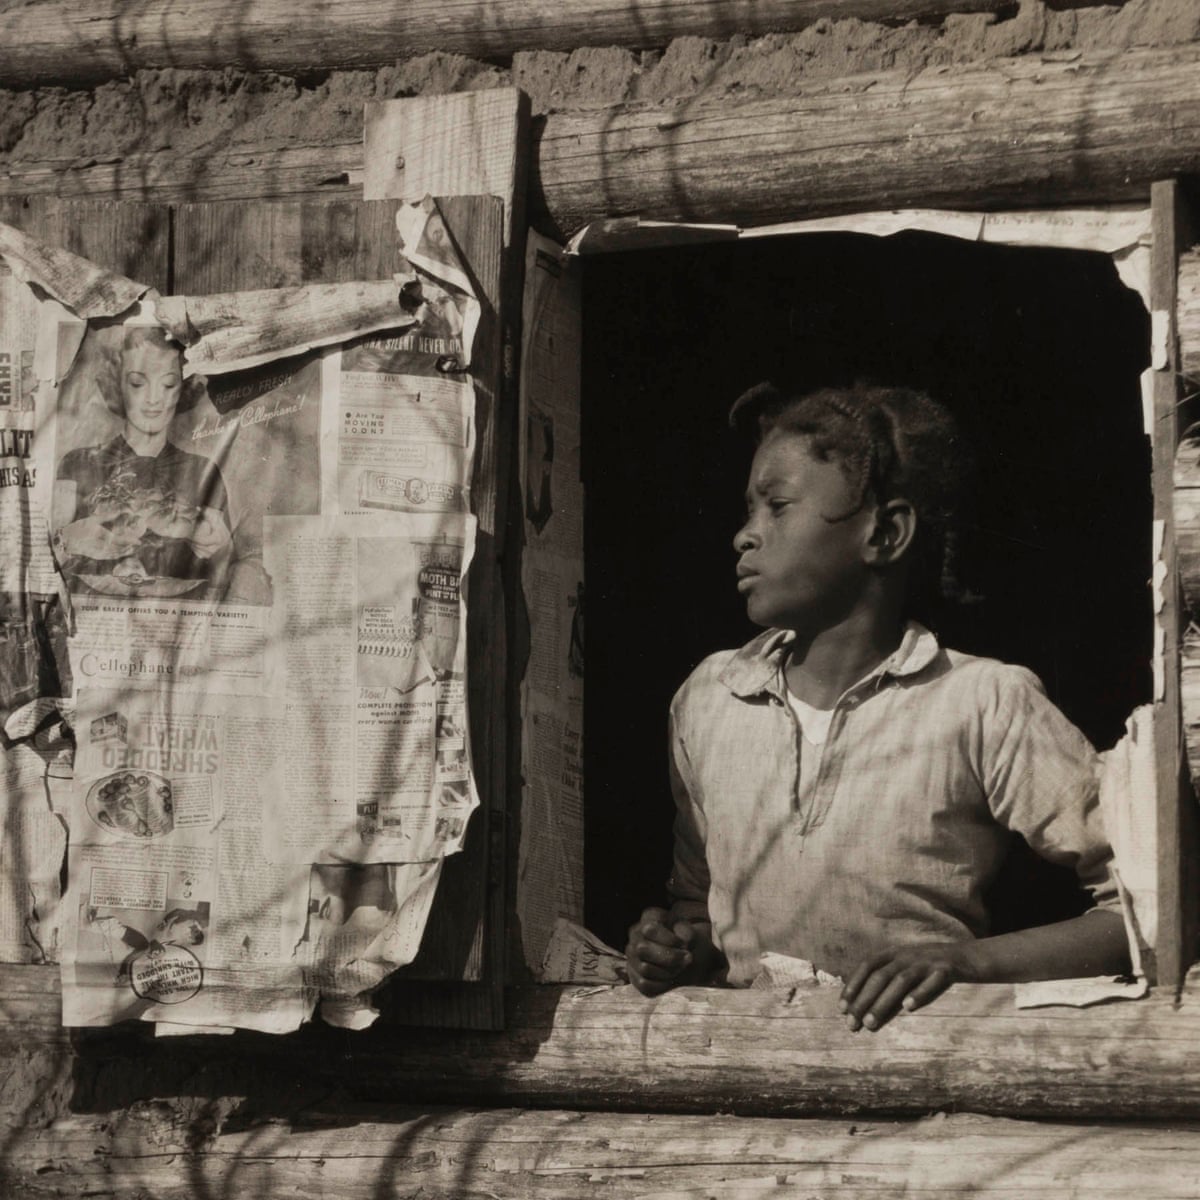 Families were devastated': looking back on the Great Depression via art